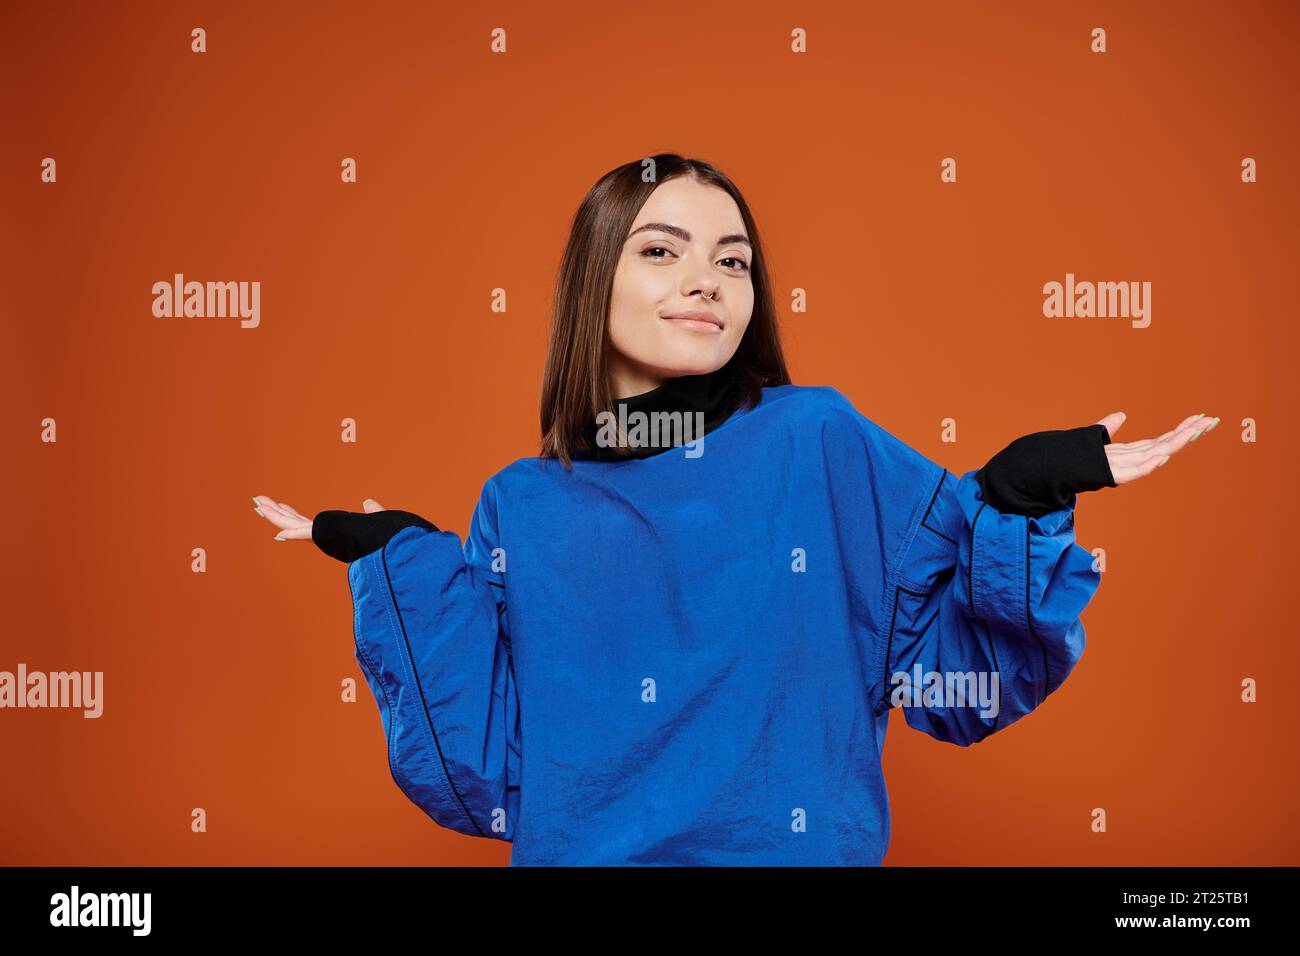 confused woman with pierced nose looking at camera while standing on orange backdrop, blue jacket Stock Photo